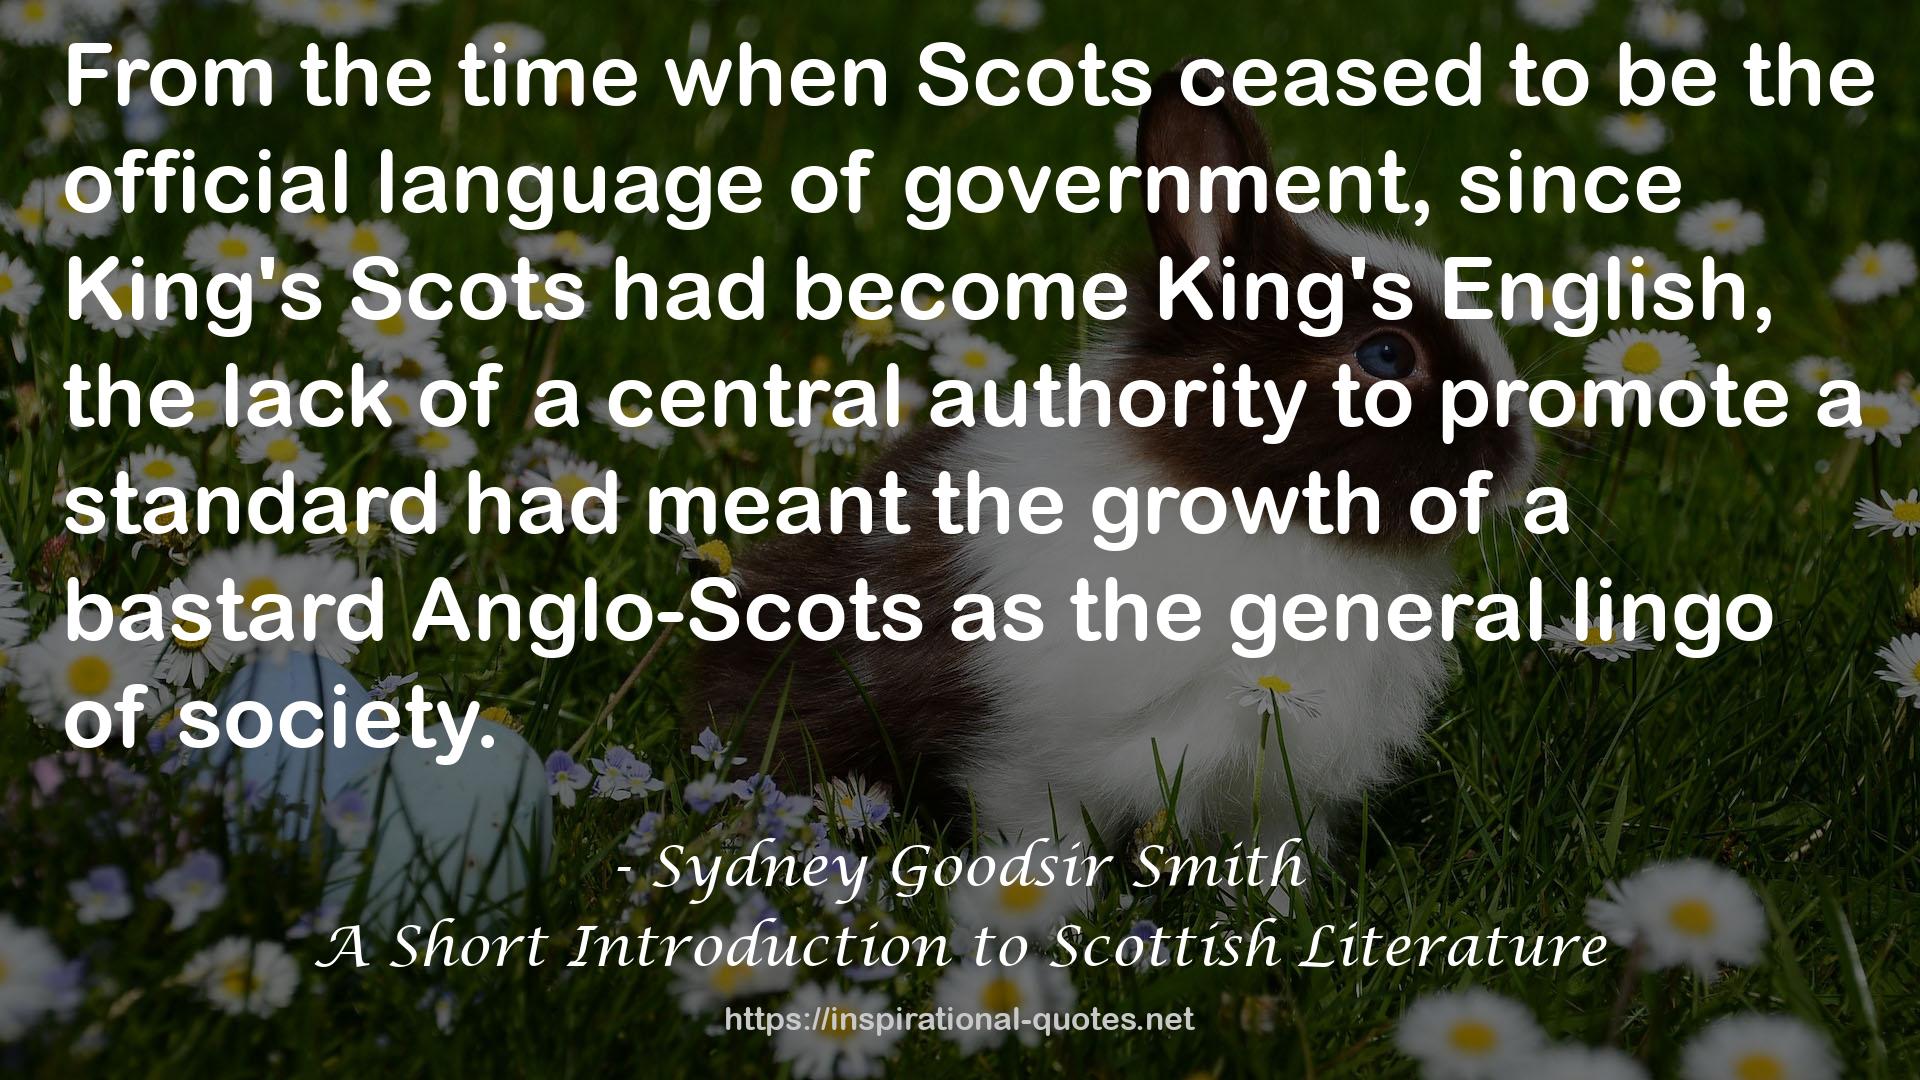 A Short Introduction to Scottish Literature QUOTES